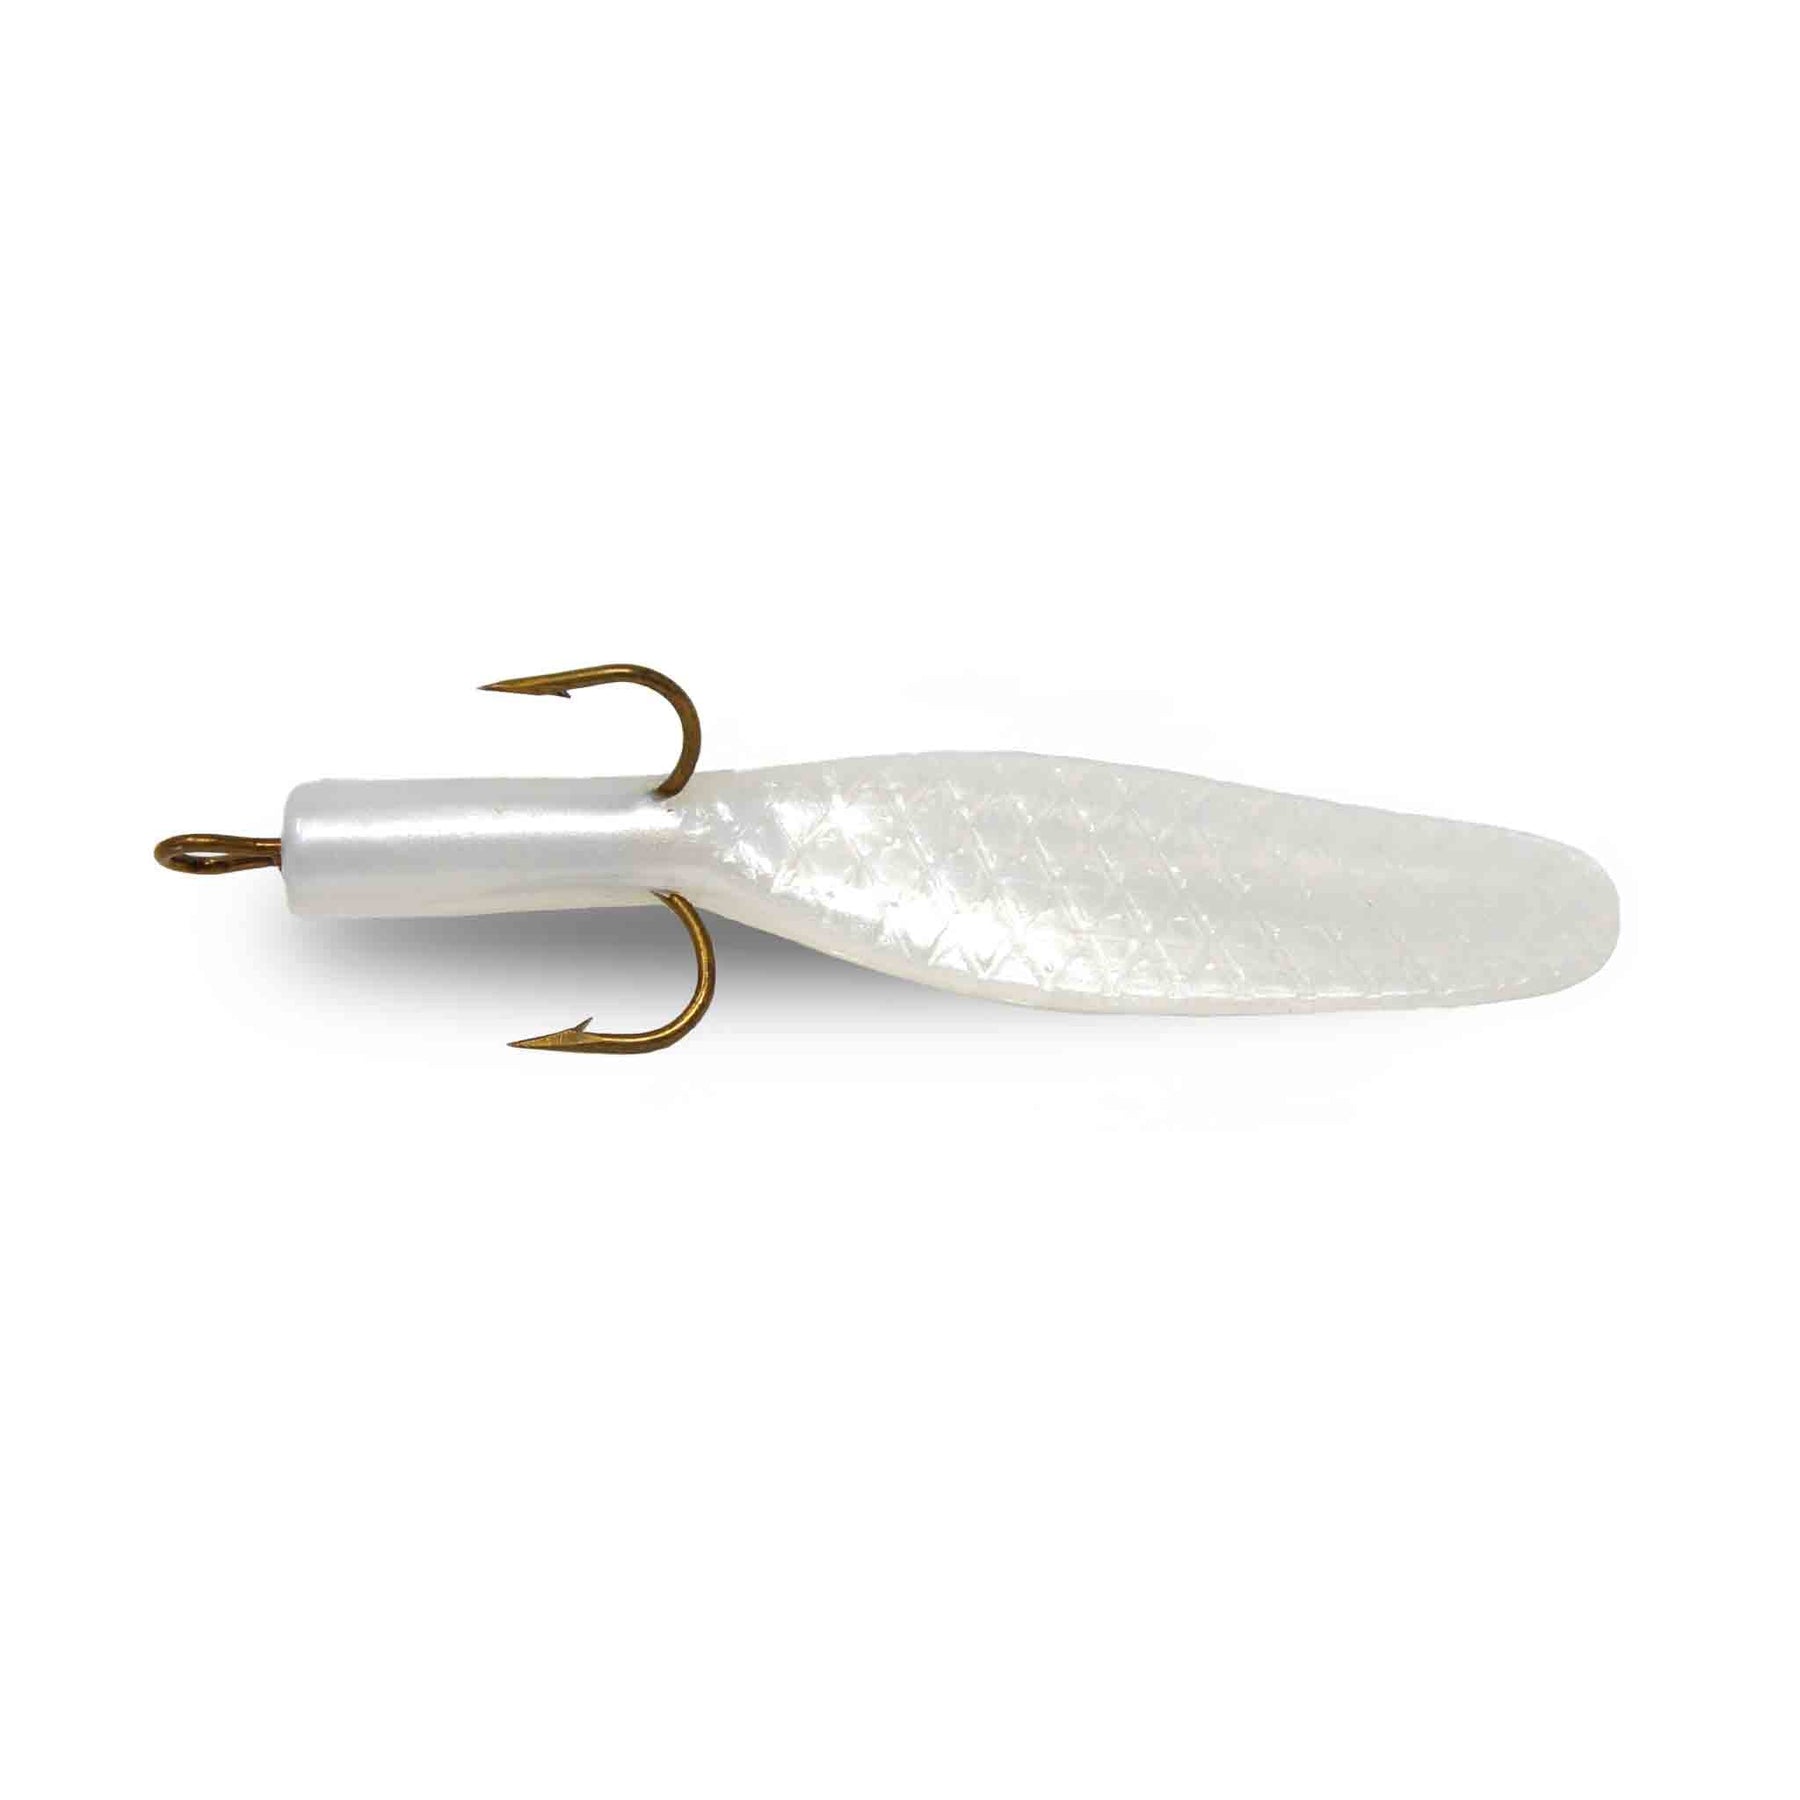 Beaver's Baits Baby Beaver Replacement Tail White Replacement Tails